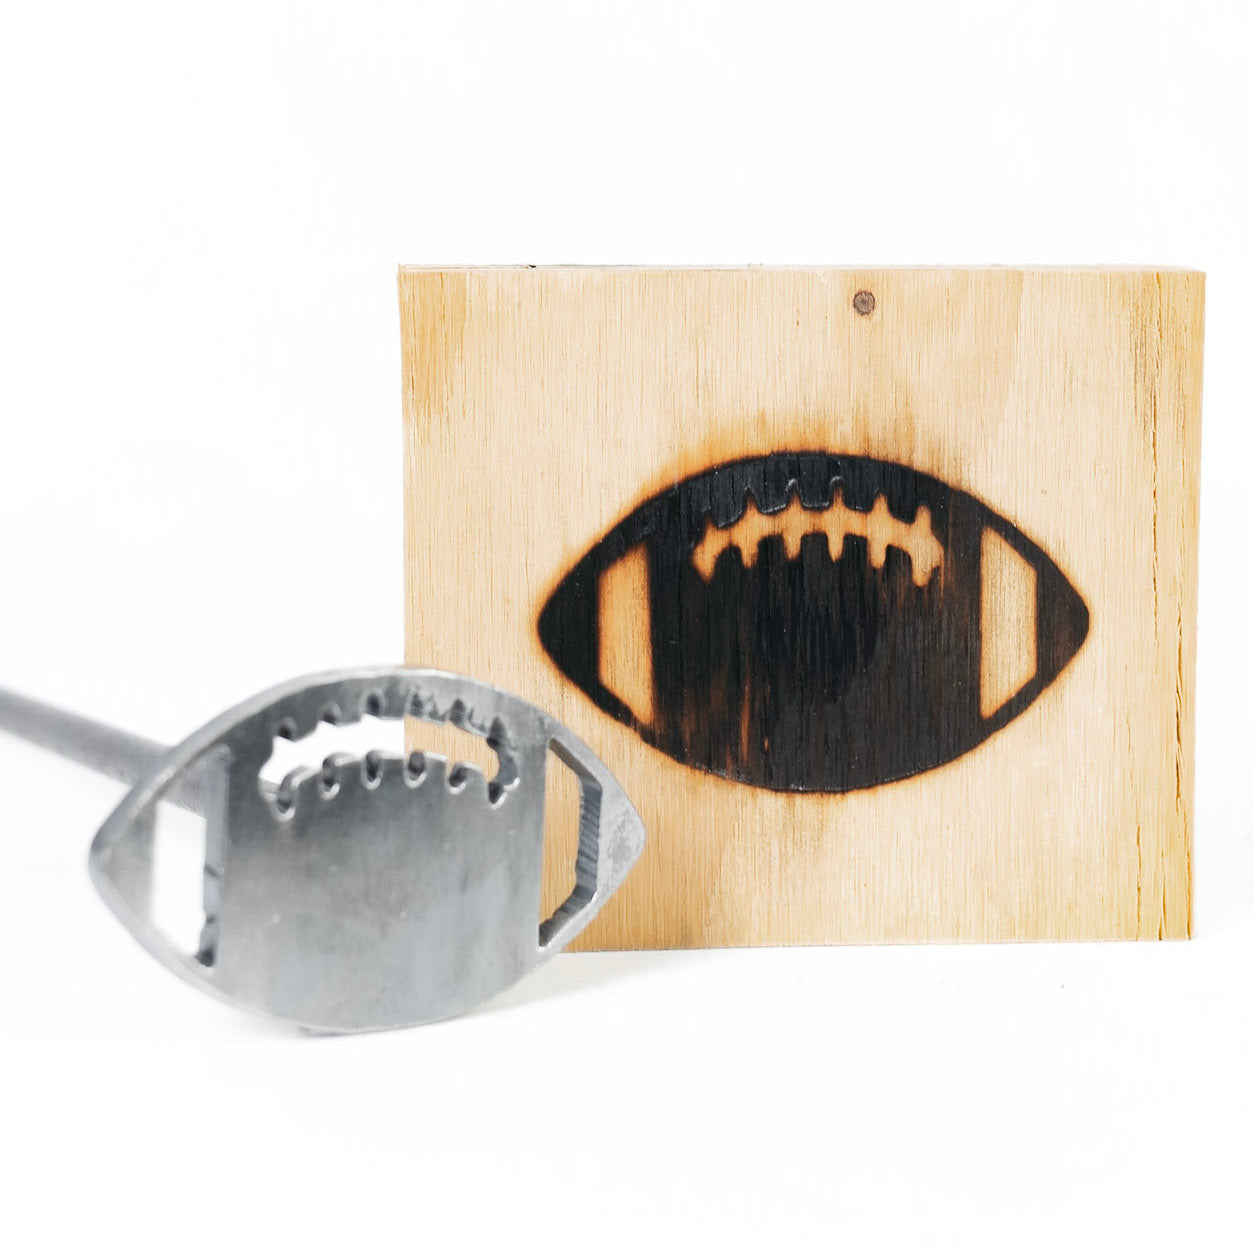 Football Brand - BBQ, Crafts, Woodworking Projects - The Heritage Forge